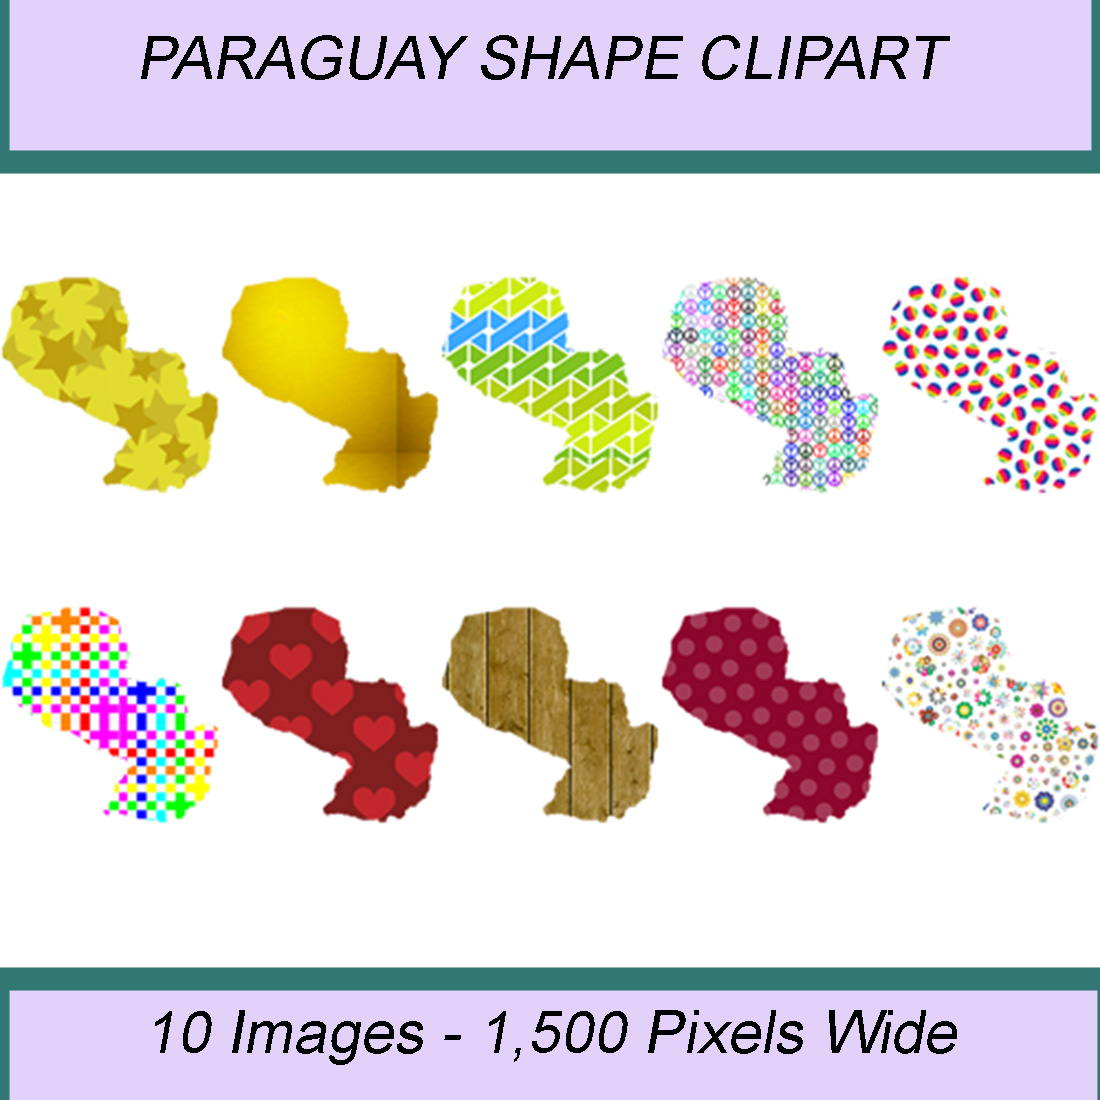 PARAGUAY SHAPE CLIPART ICONS cover image.